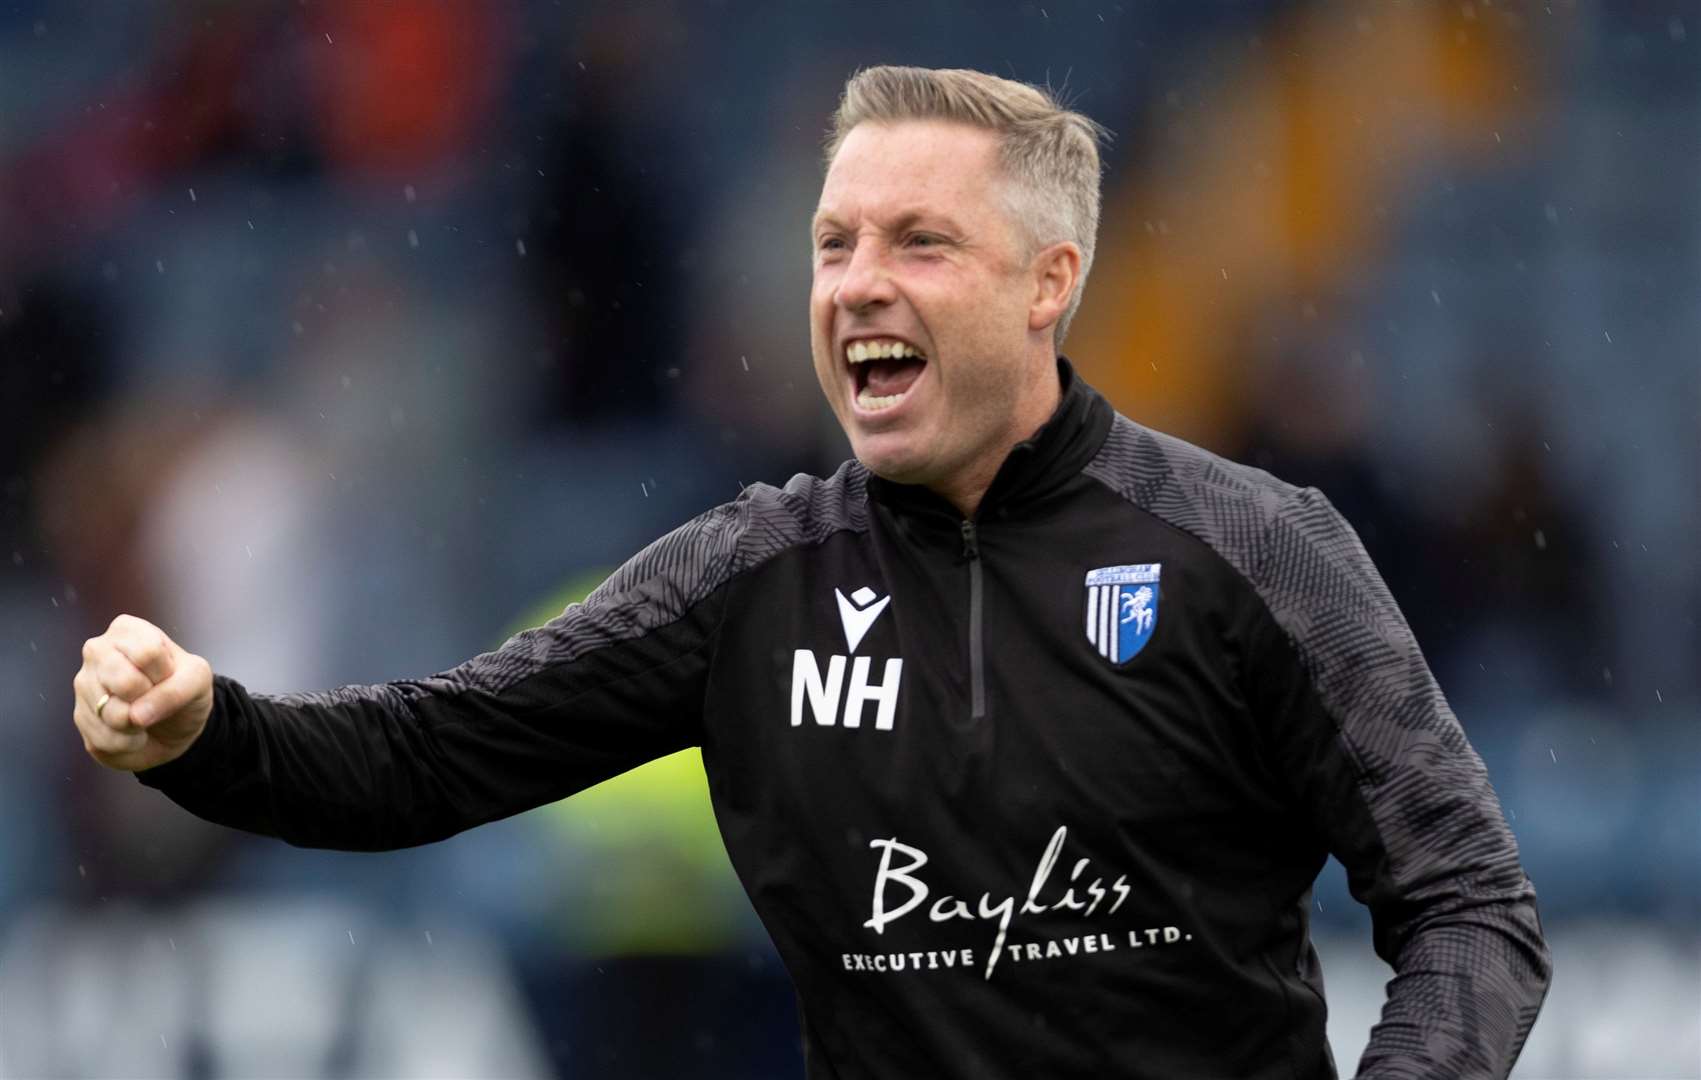 Gillingham manager Neil Harris celebrates their win at Stockport on Saturday. Picture: @Julian_KPI